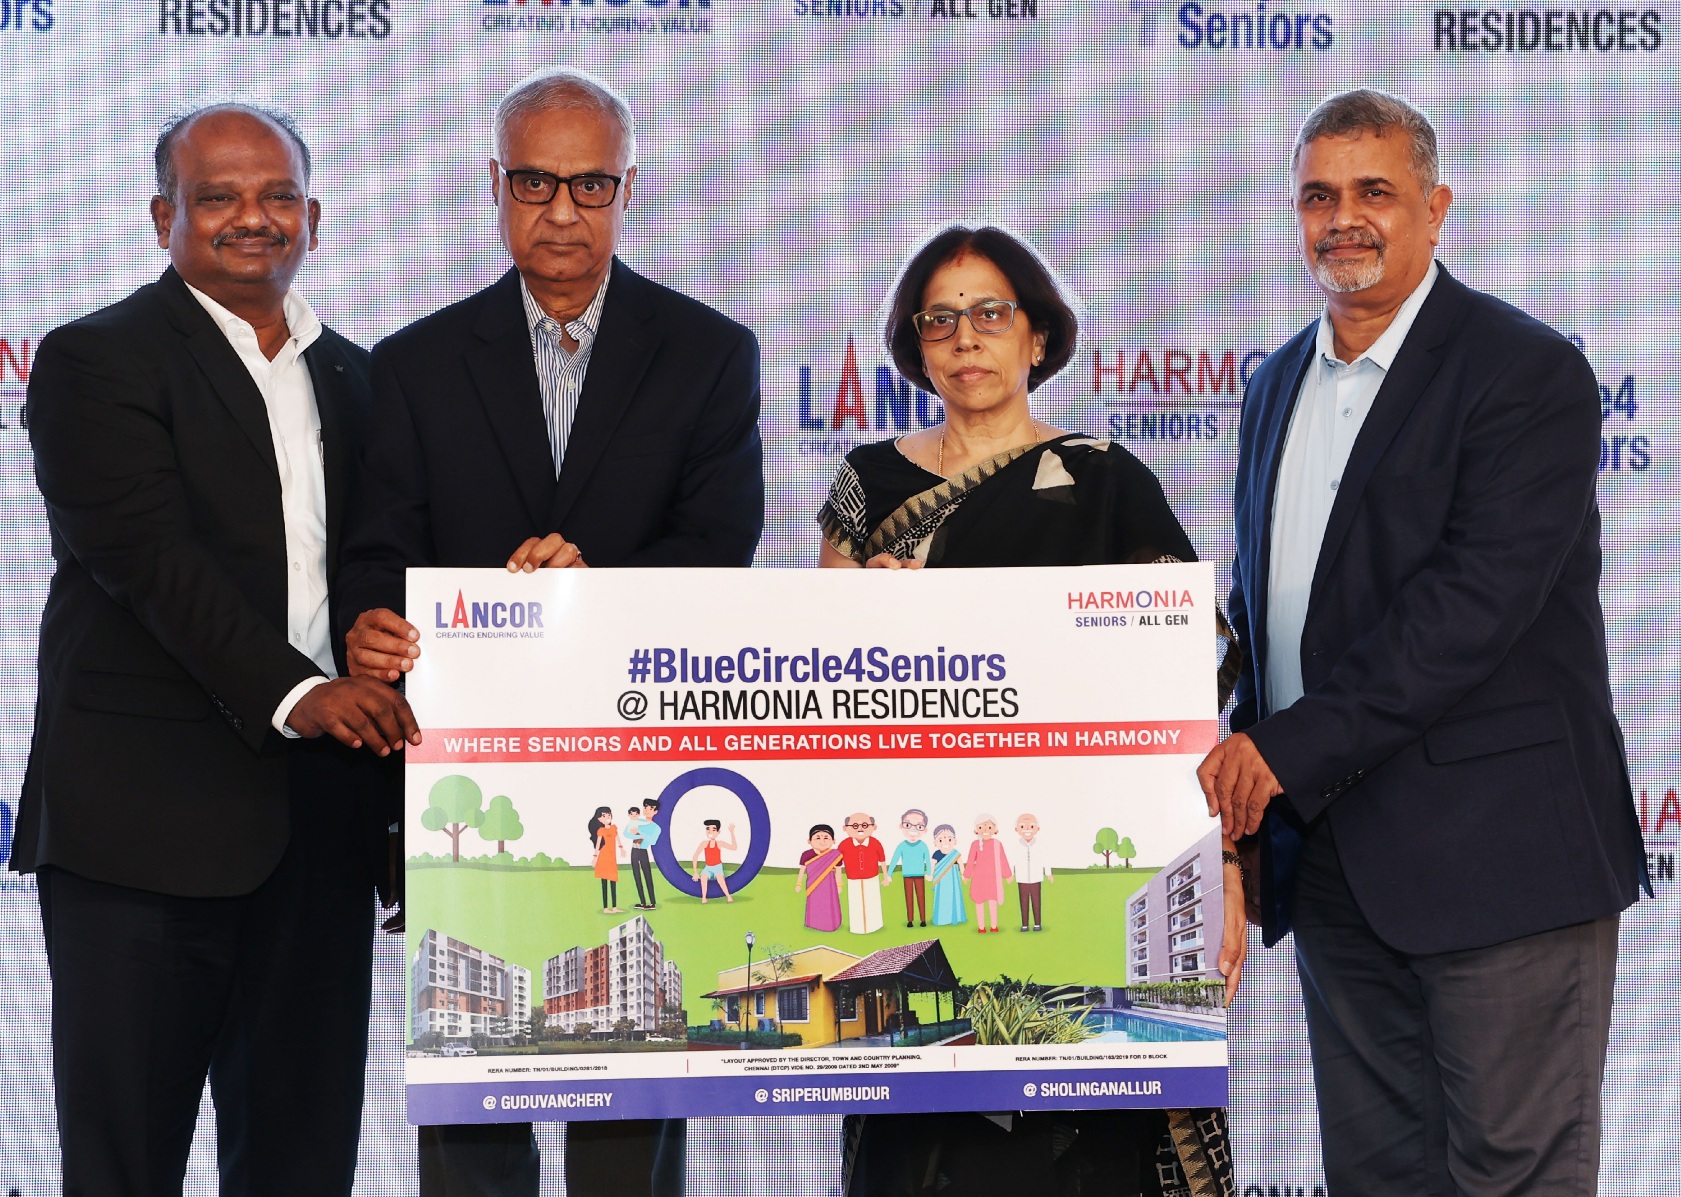 Lancor Launches “Harmonia”, India’s First ‘Blue Circle’ Townships for Senior Residences with Cross Generational Communities